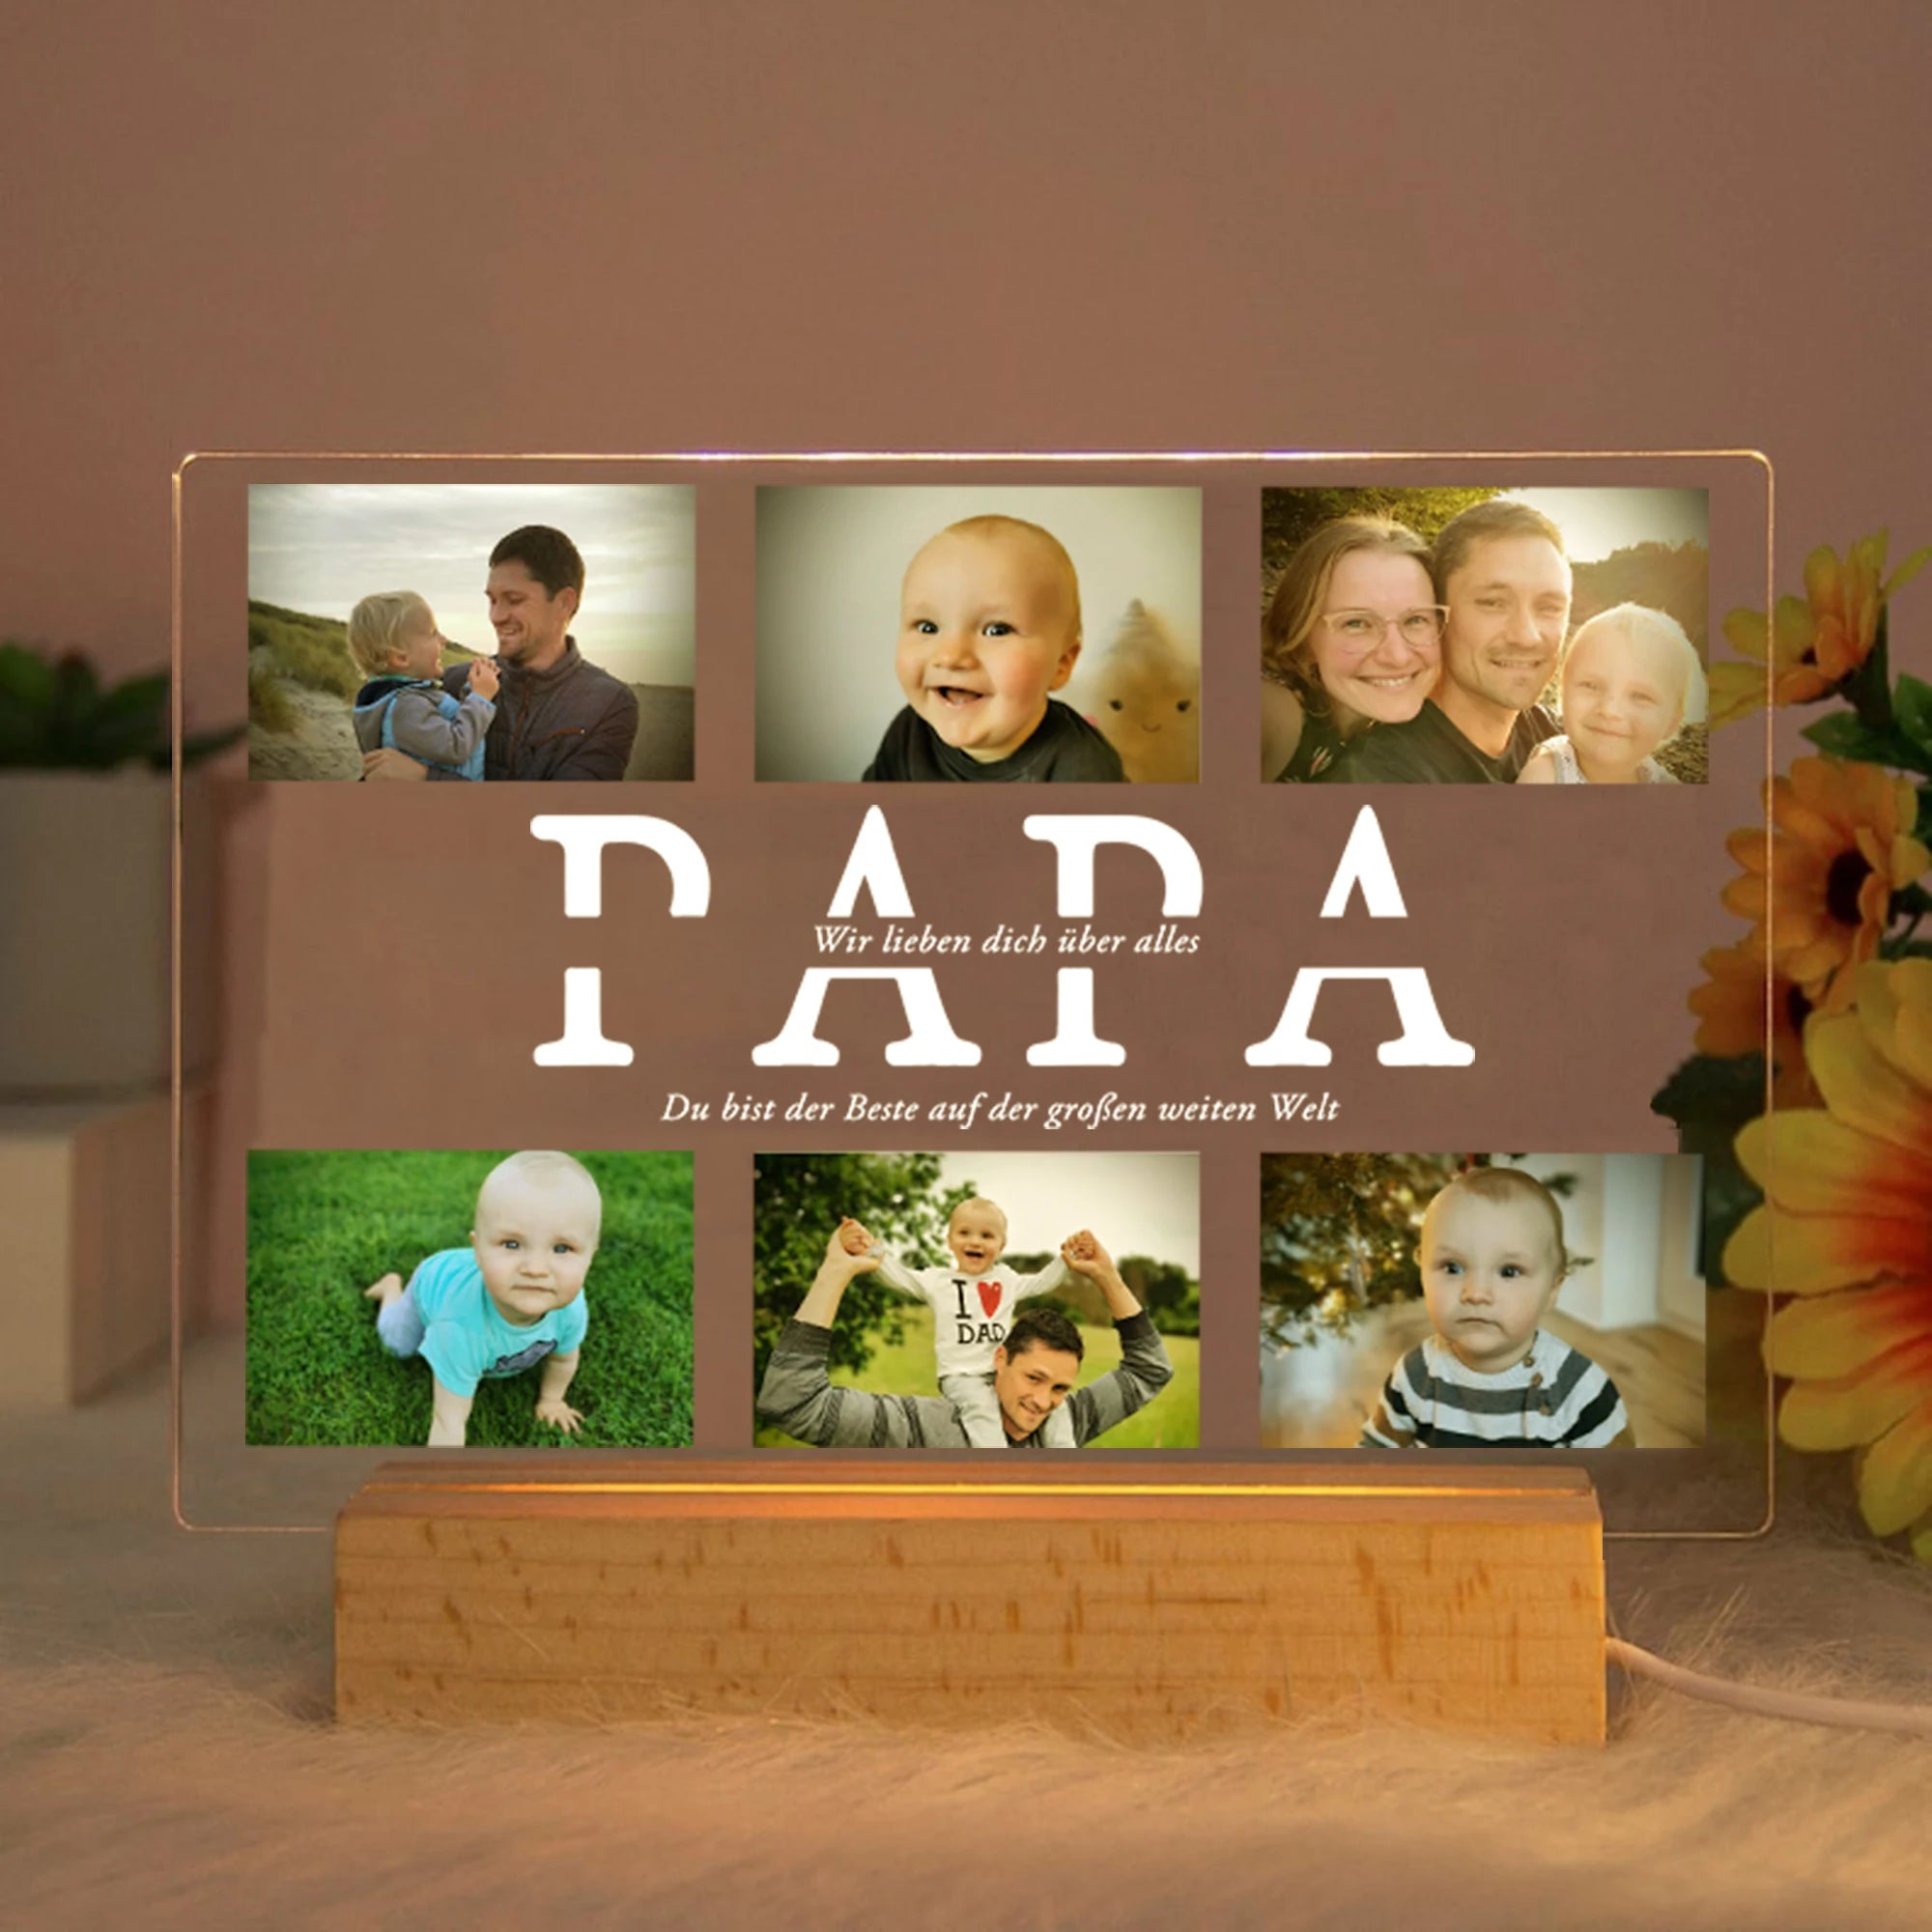 Personalized Acrylic Lamp with Custom Photo and Text - Ideal Bedroom Night Light for MOM DAD LOVE Friend Family Day Wedding Birthday Gift Present PAPA / Warm Light